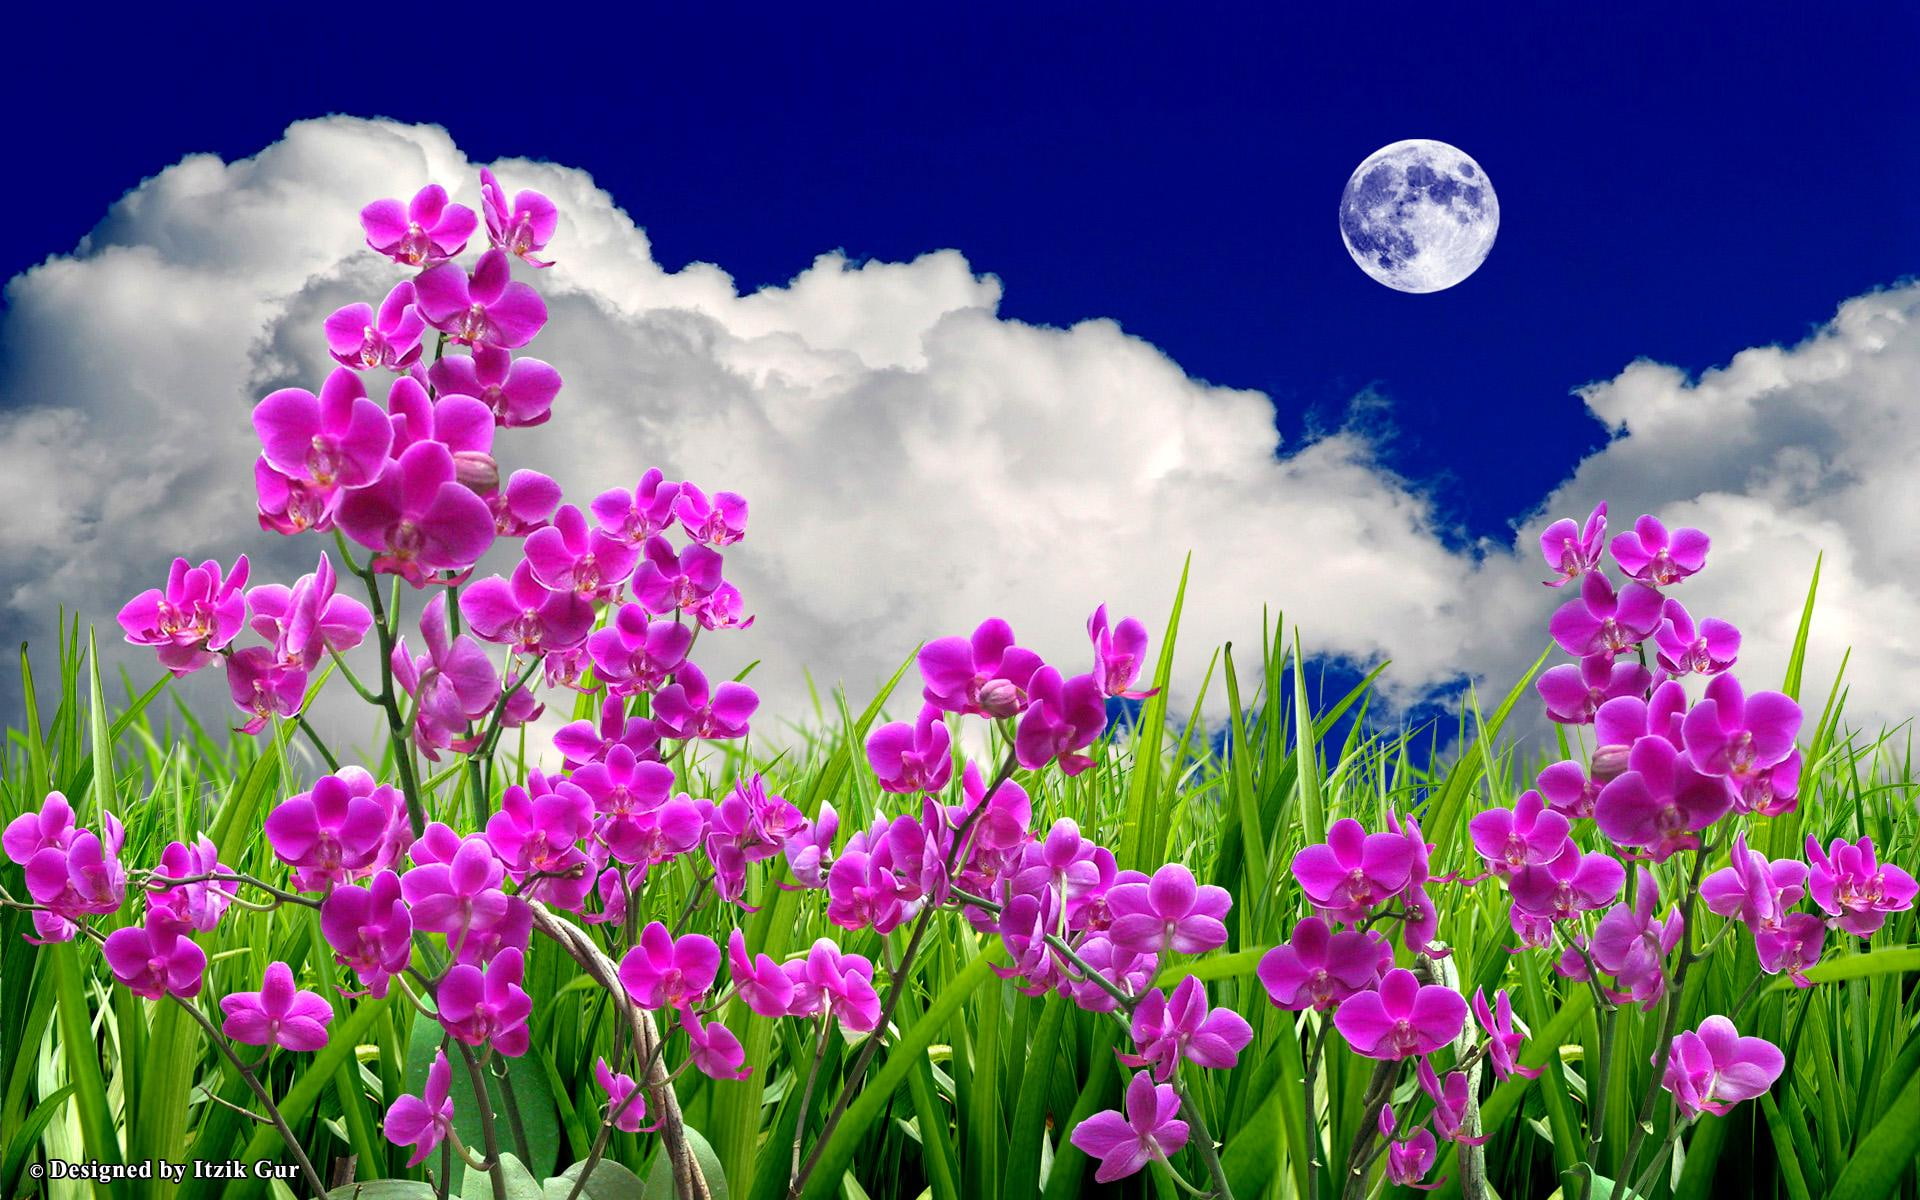 Flowers Field In The Moon, colourful, 3d and abstract